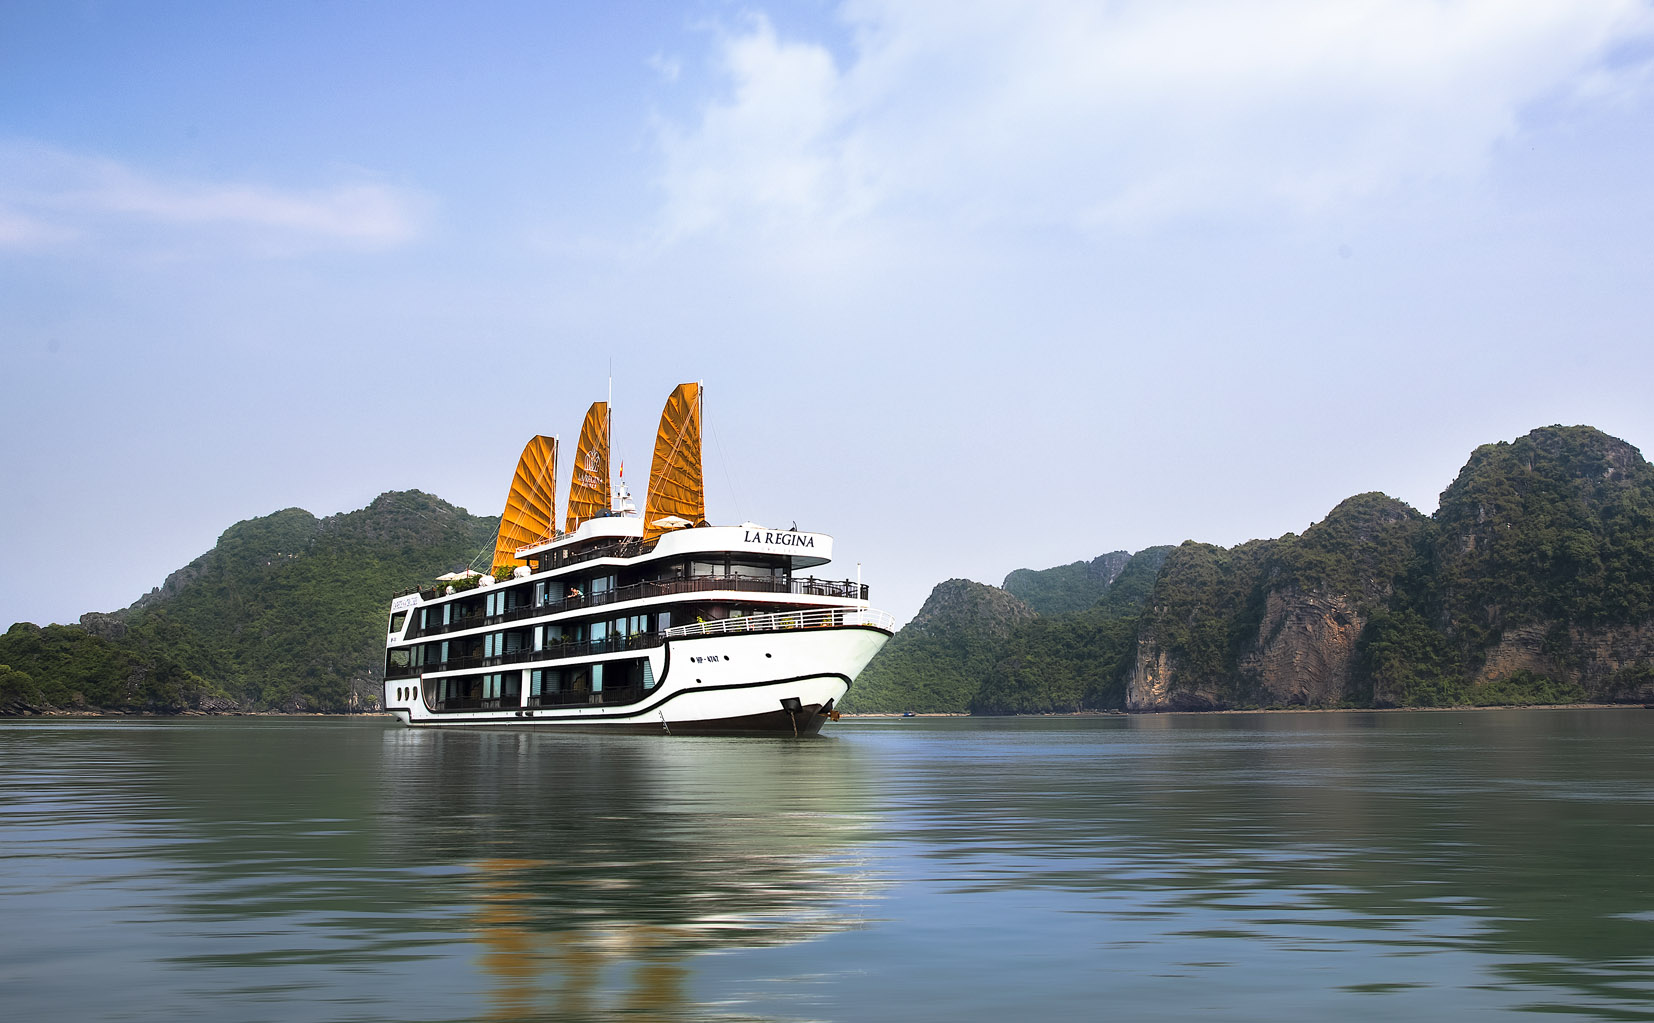 HA LONG BAY – 2 days and 1 night with La Regina Legend cruise (5 star cruise - Boat with 27 cabins)